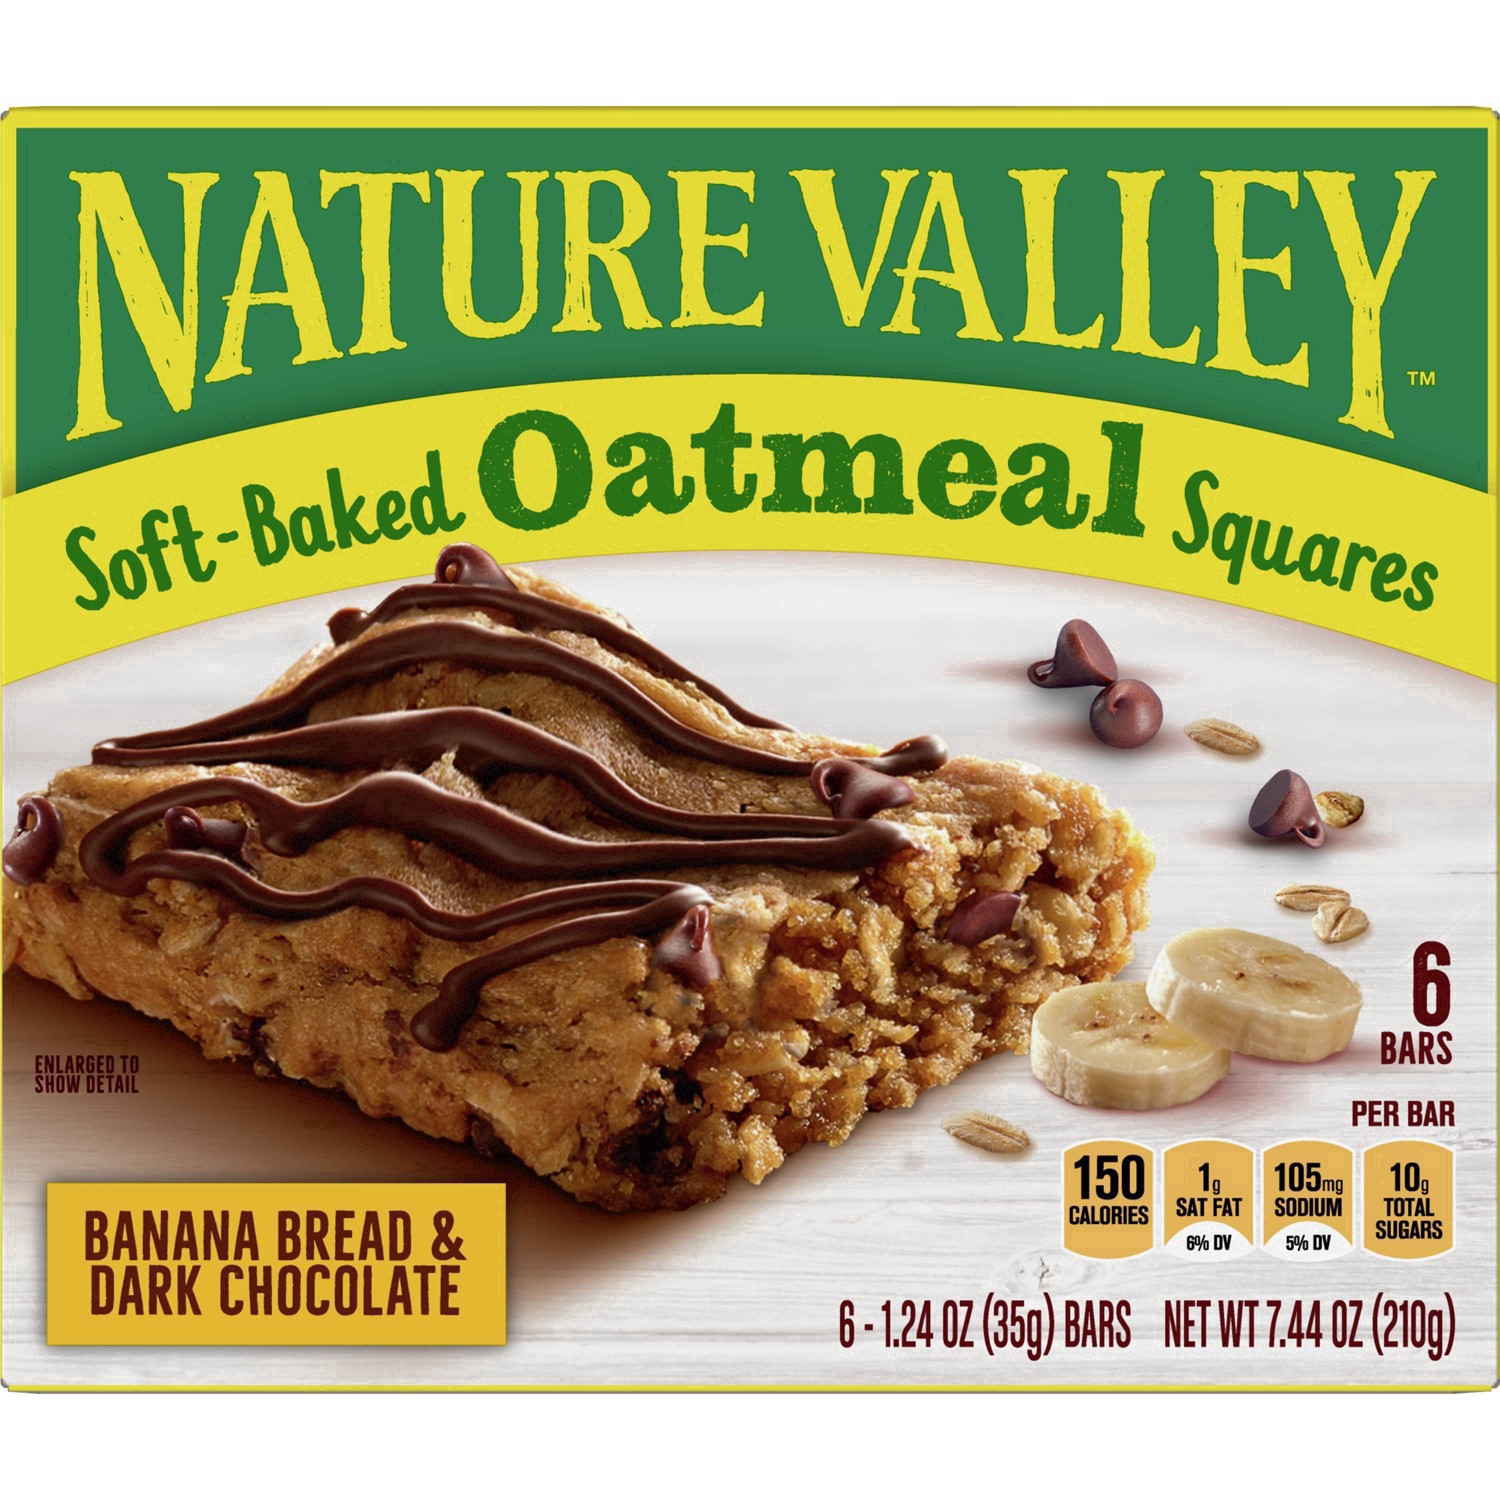 slide 92 of 101, Nature Valley Soft-Baked Oatmeal Squares, Banana Bread & Dark Chocolate, 6 ct, 6 ct